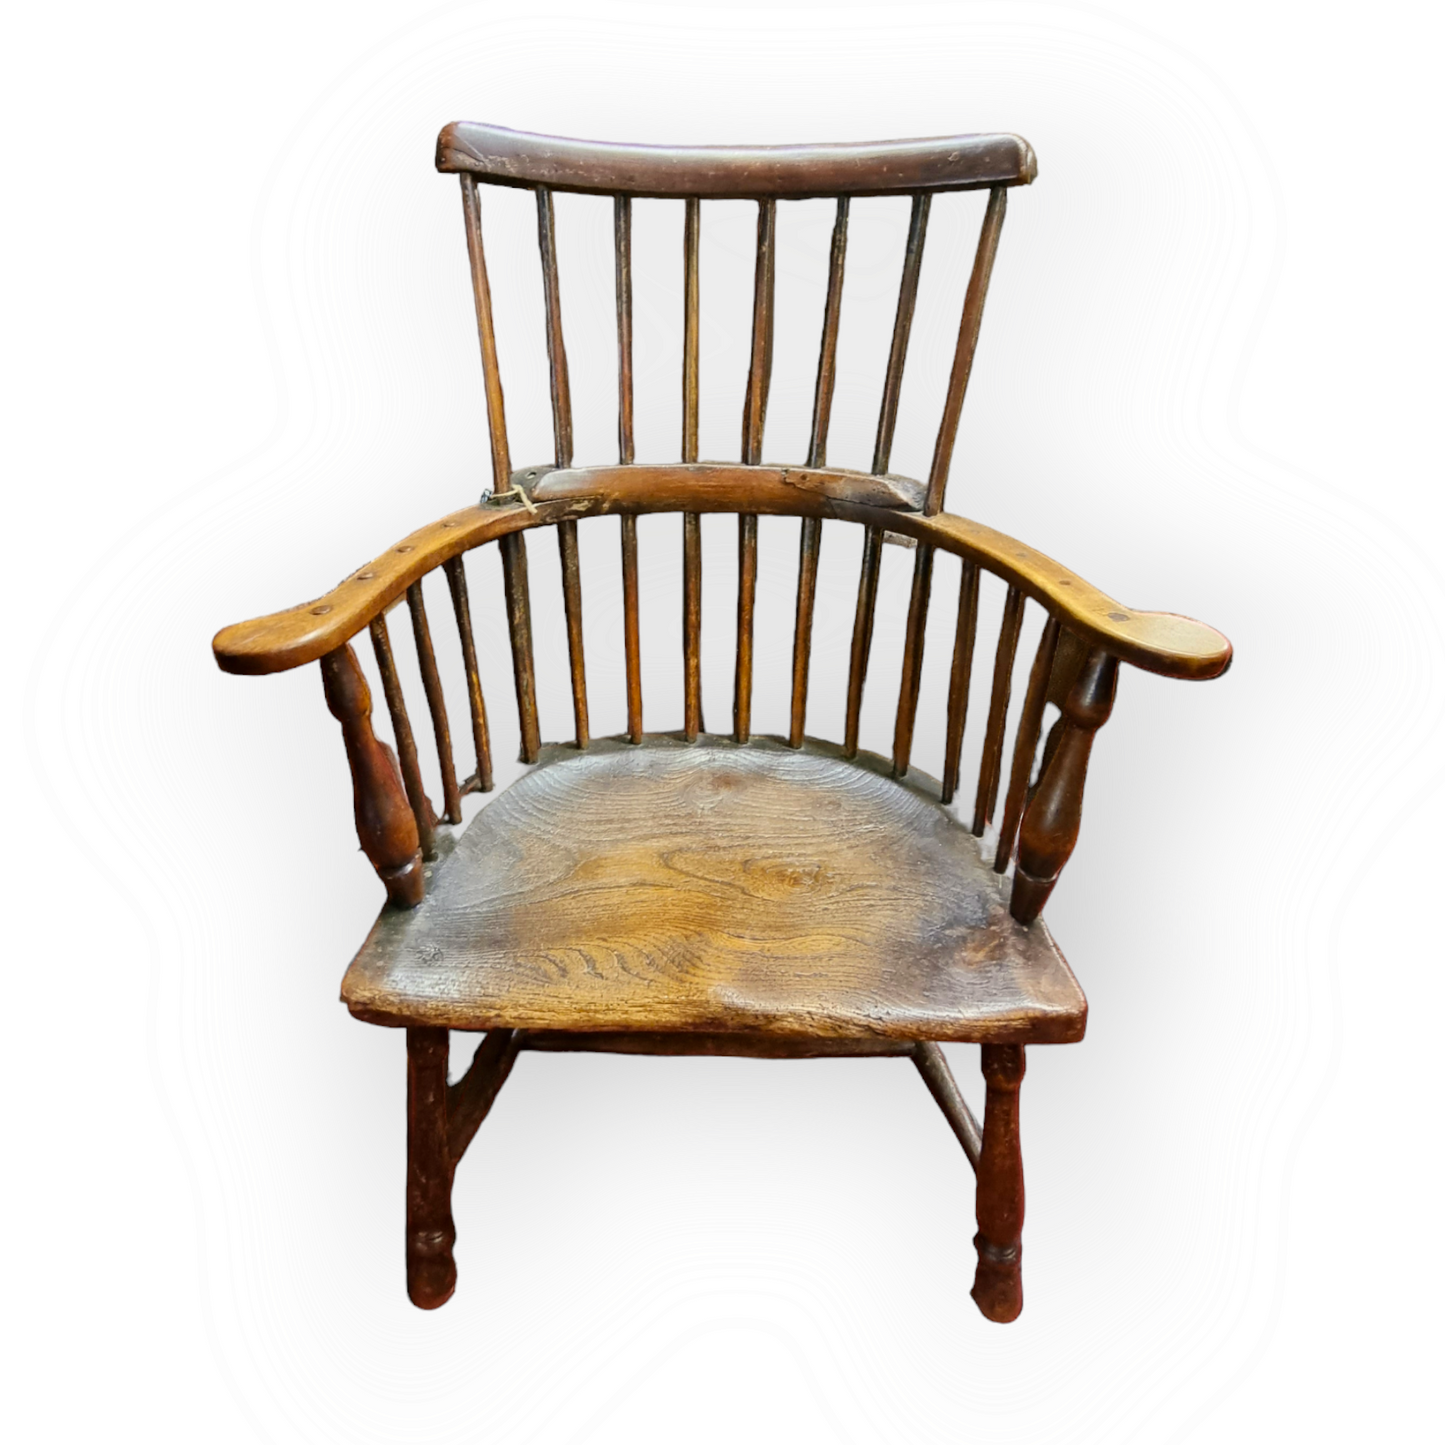 Early 19th Century English Antique Comb Back Windsor Armchair